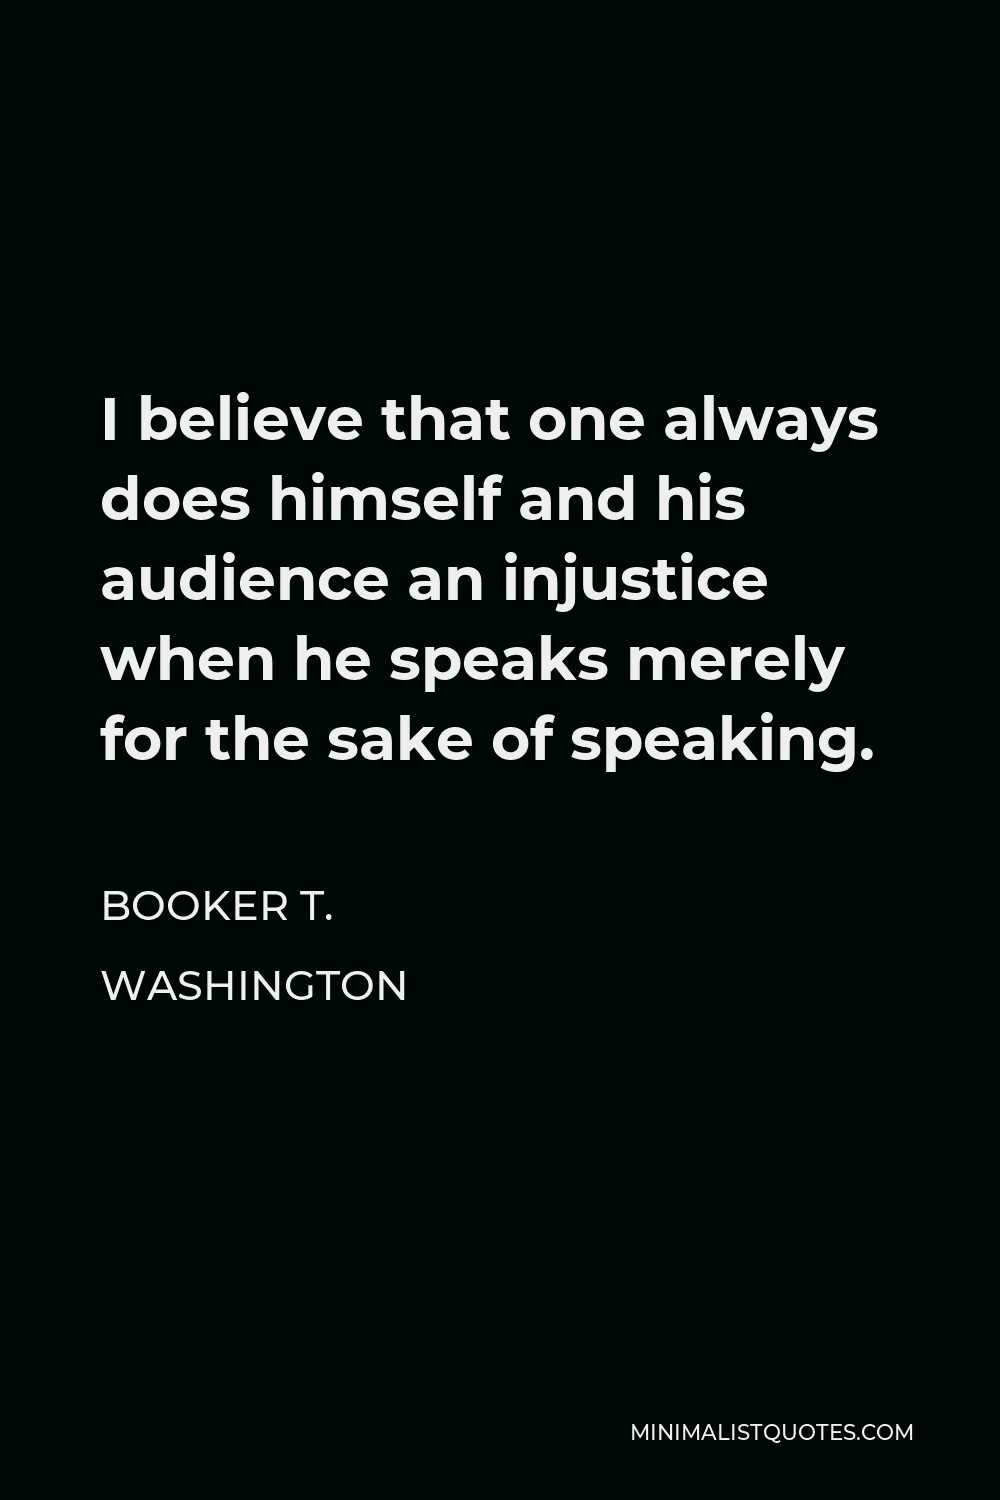 Booker T. Washington Quote - I believe that one always does himself and his audience an injustice when he speaks merely for the sake of speaking.